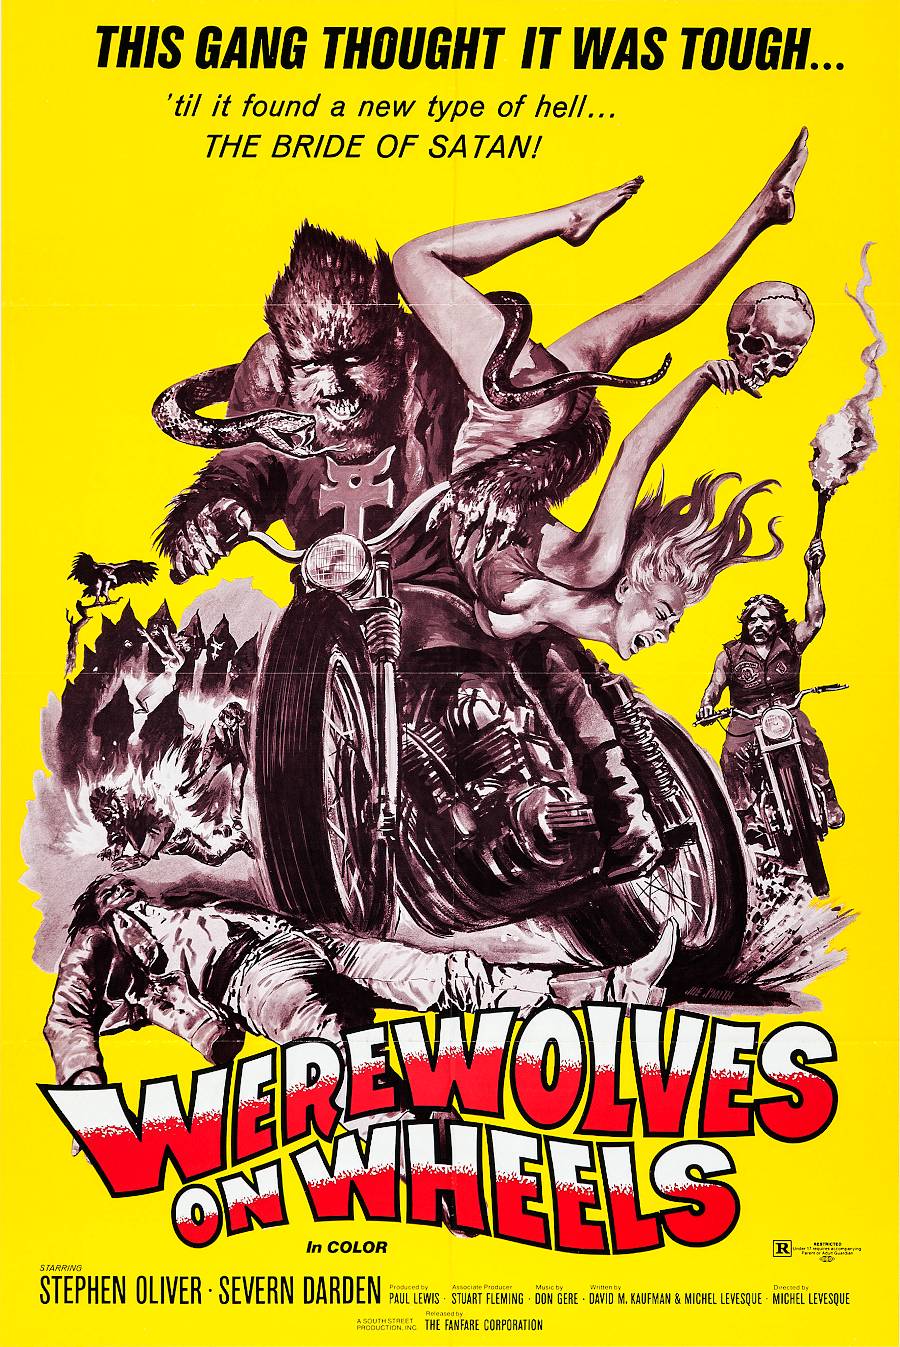 Werewolves – Fists and .45s!